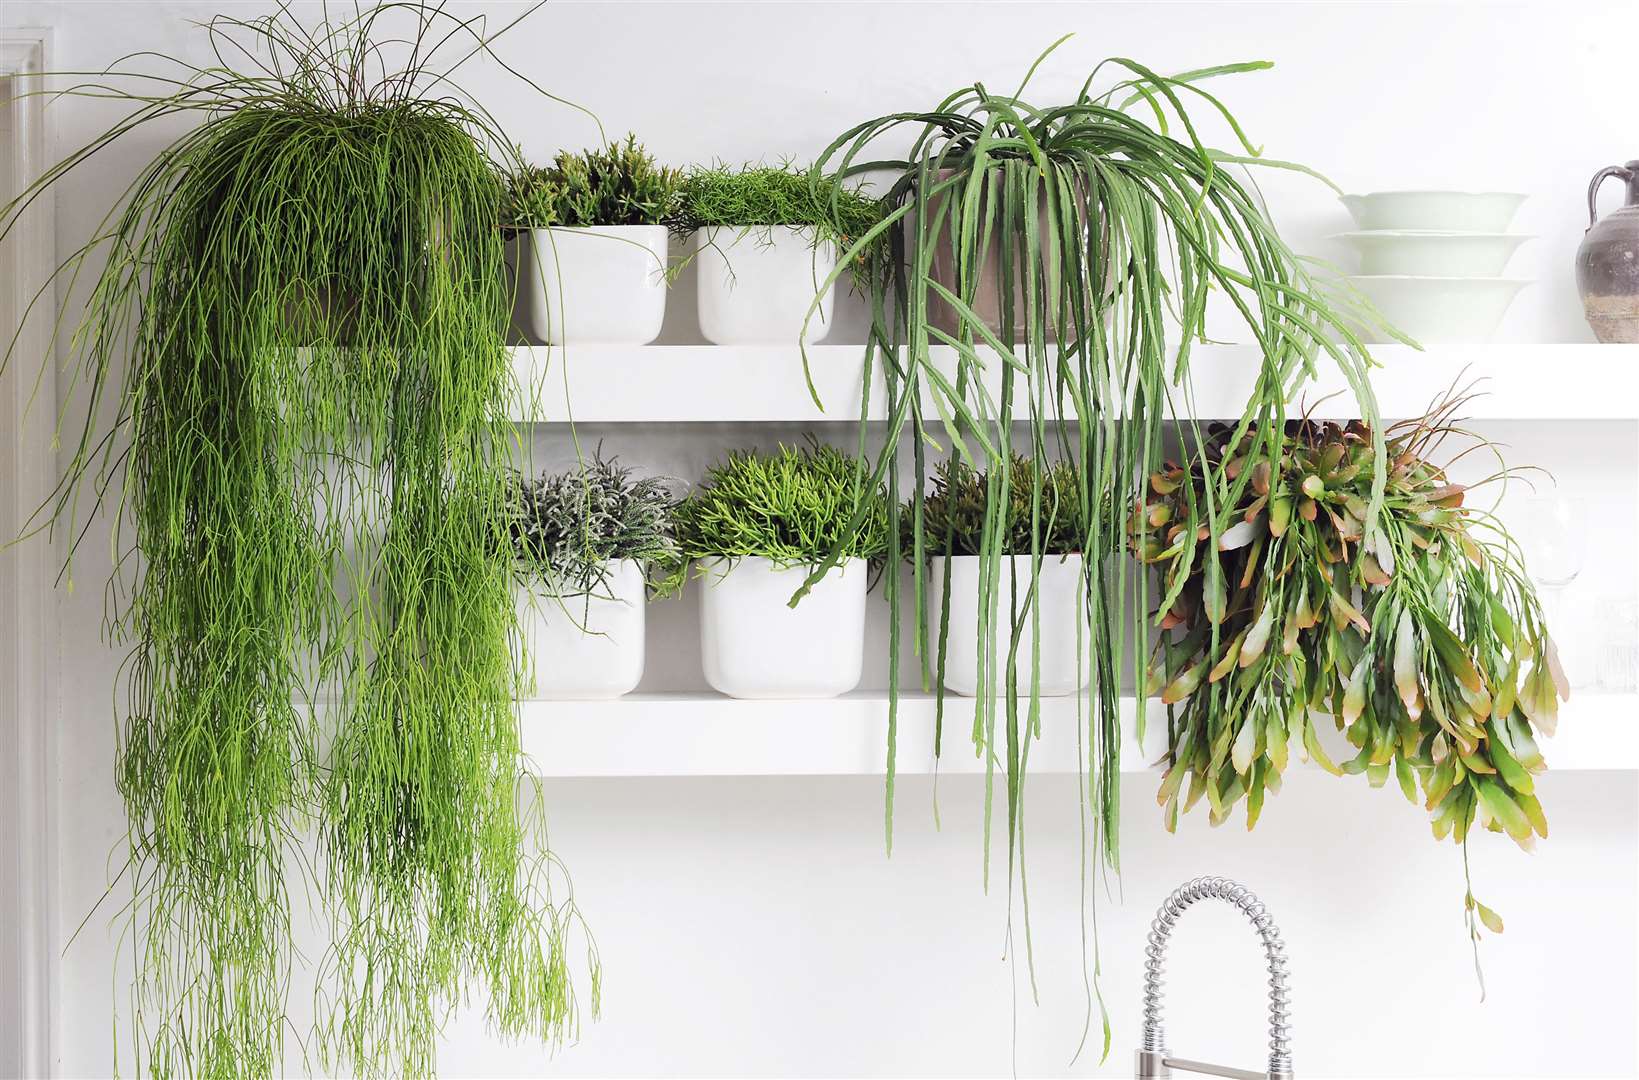 Trailing houseplants can add interest and colour to a room. Picture: Thejoyofplants.co.uk/PA